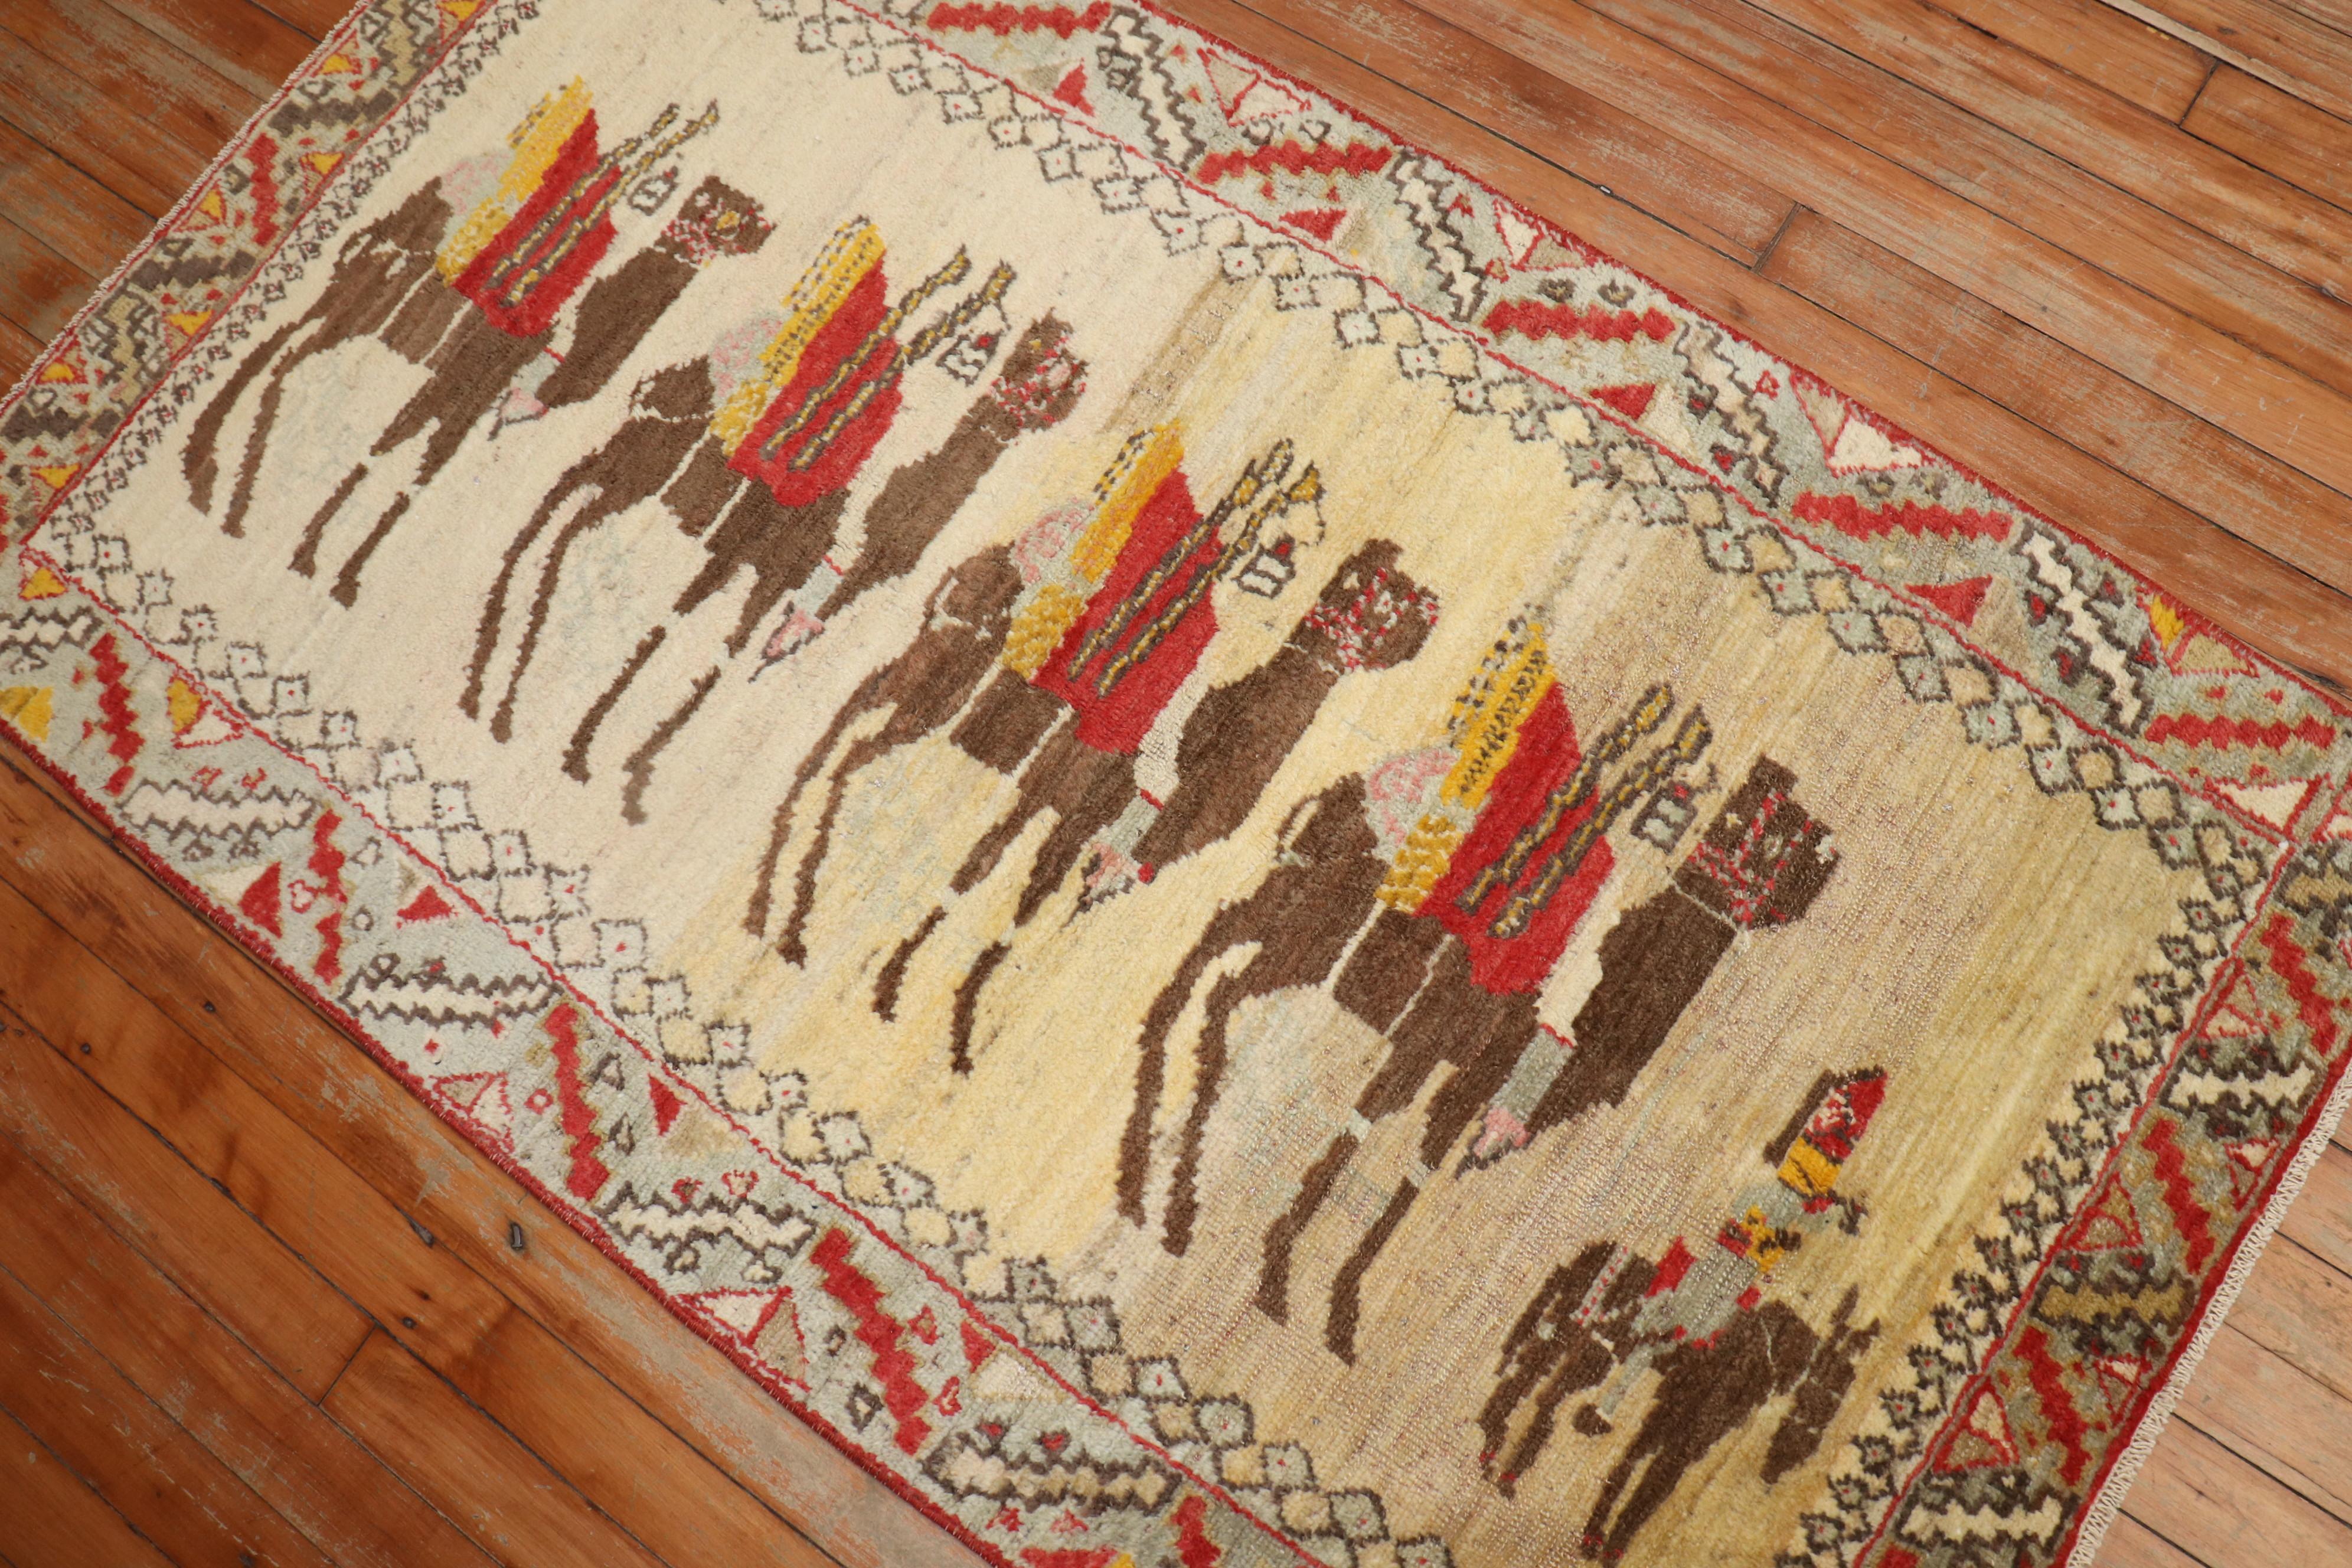 Hand-Woven Camel Donkey Anatolian Pictorial Rug For Sale